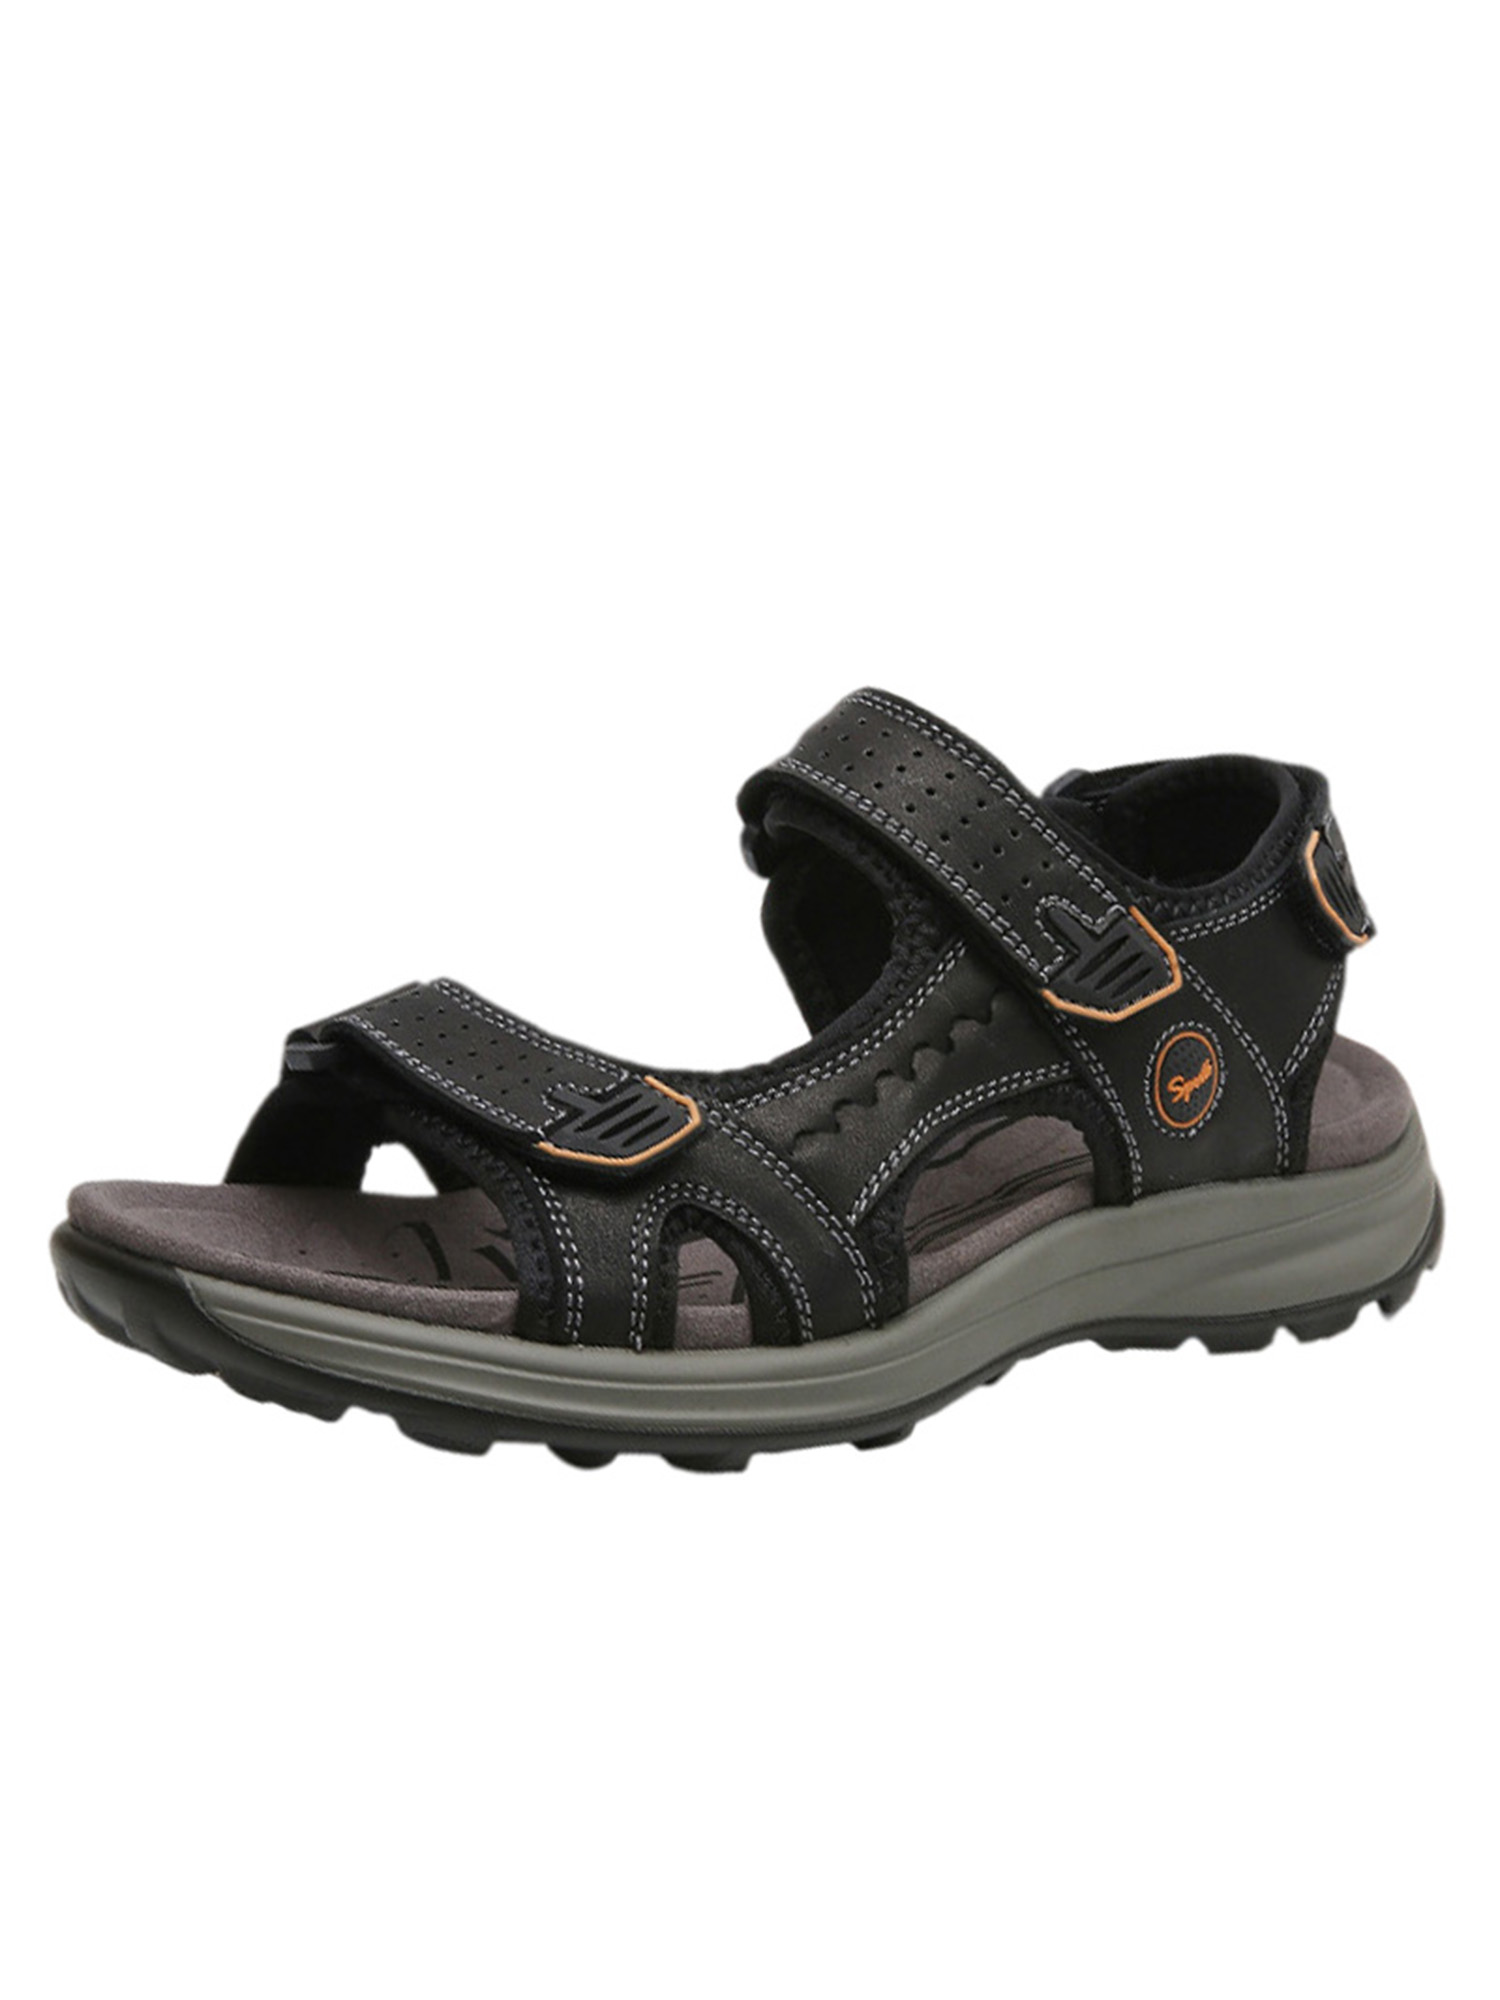 Audeban Men's Outdoor Hiking Sandals, Open Toe Arch Support Strap Water Sandals, Lightweight Athletic Trail Sport Sandals - image 3 of 5